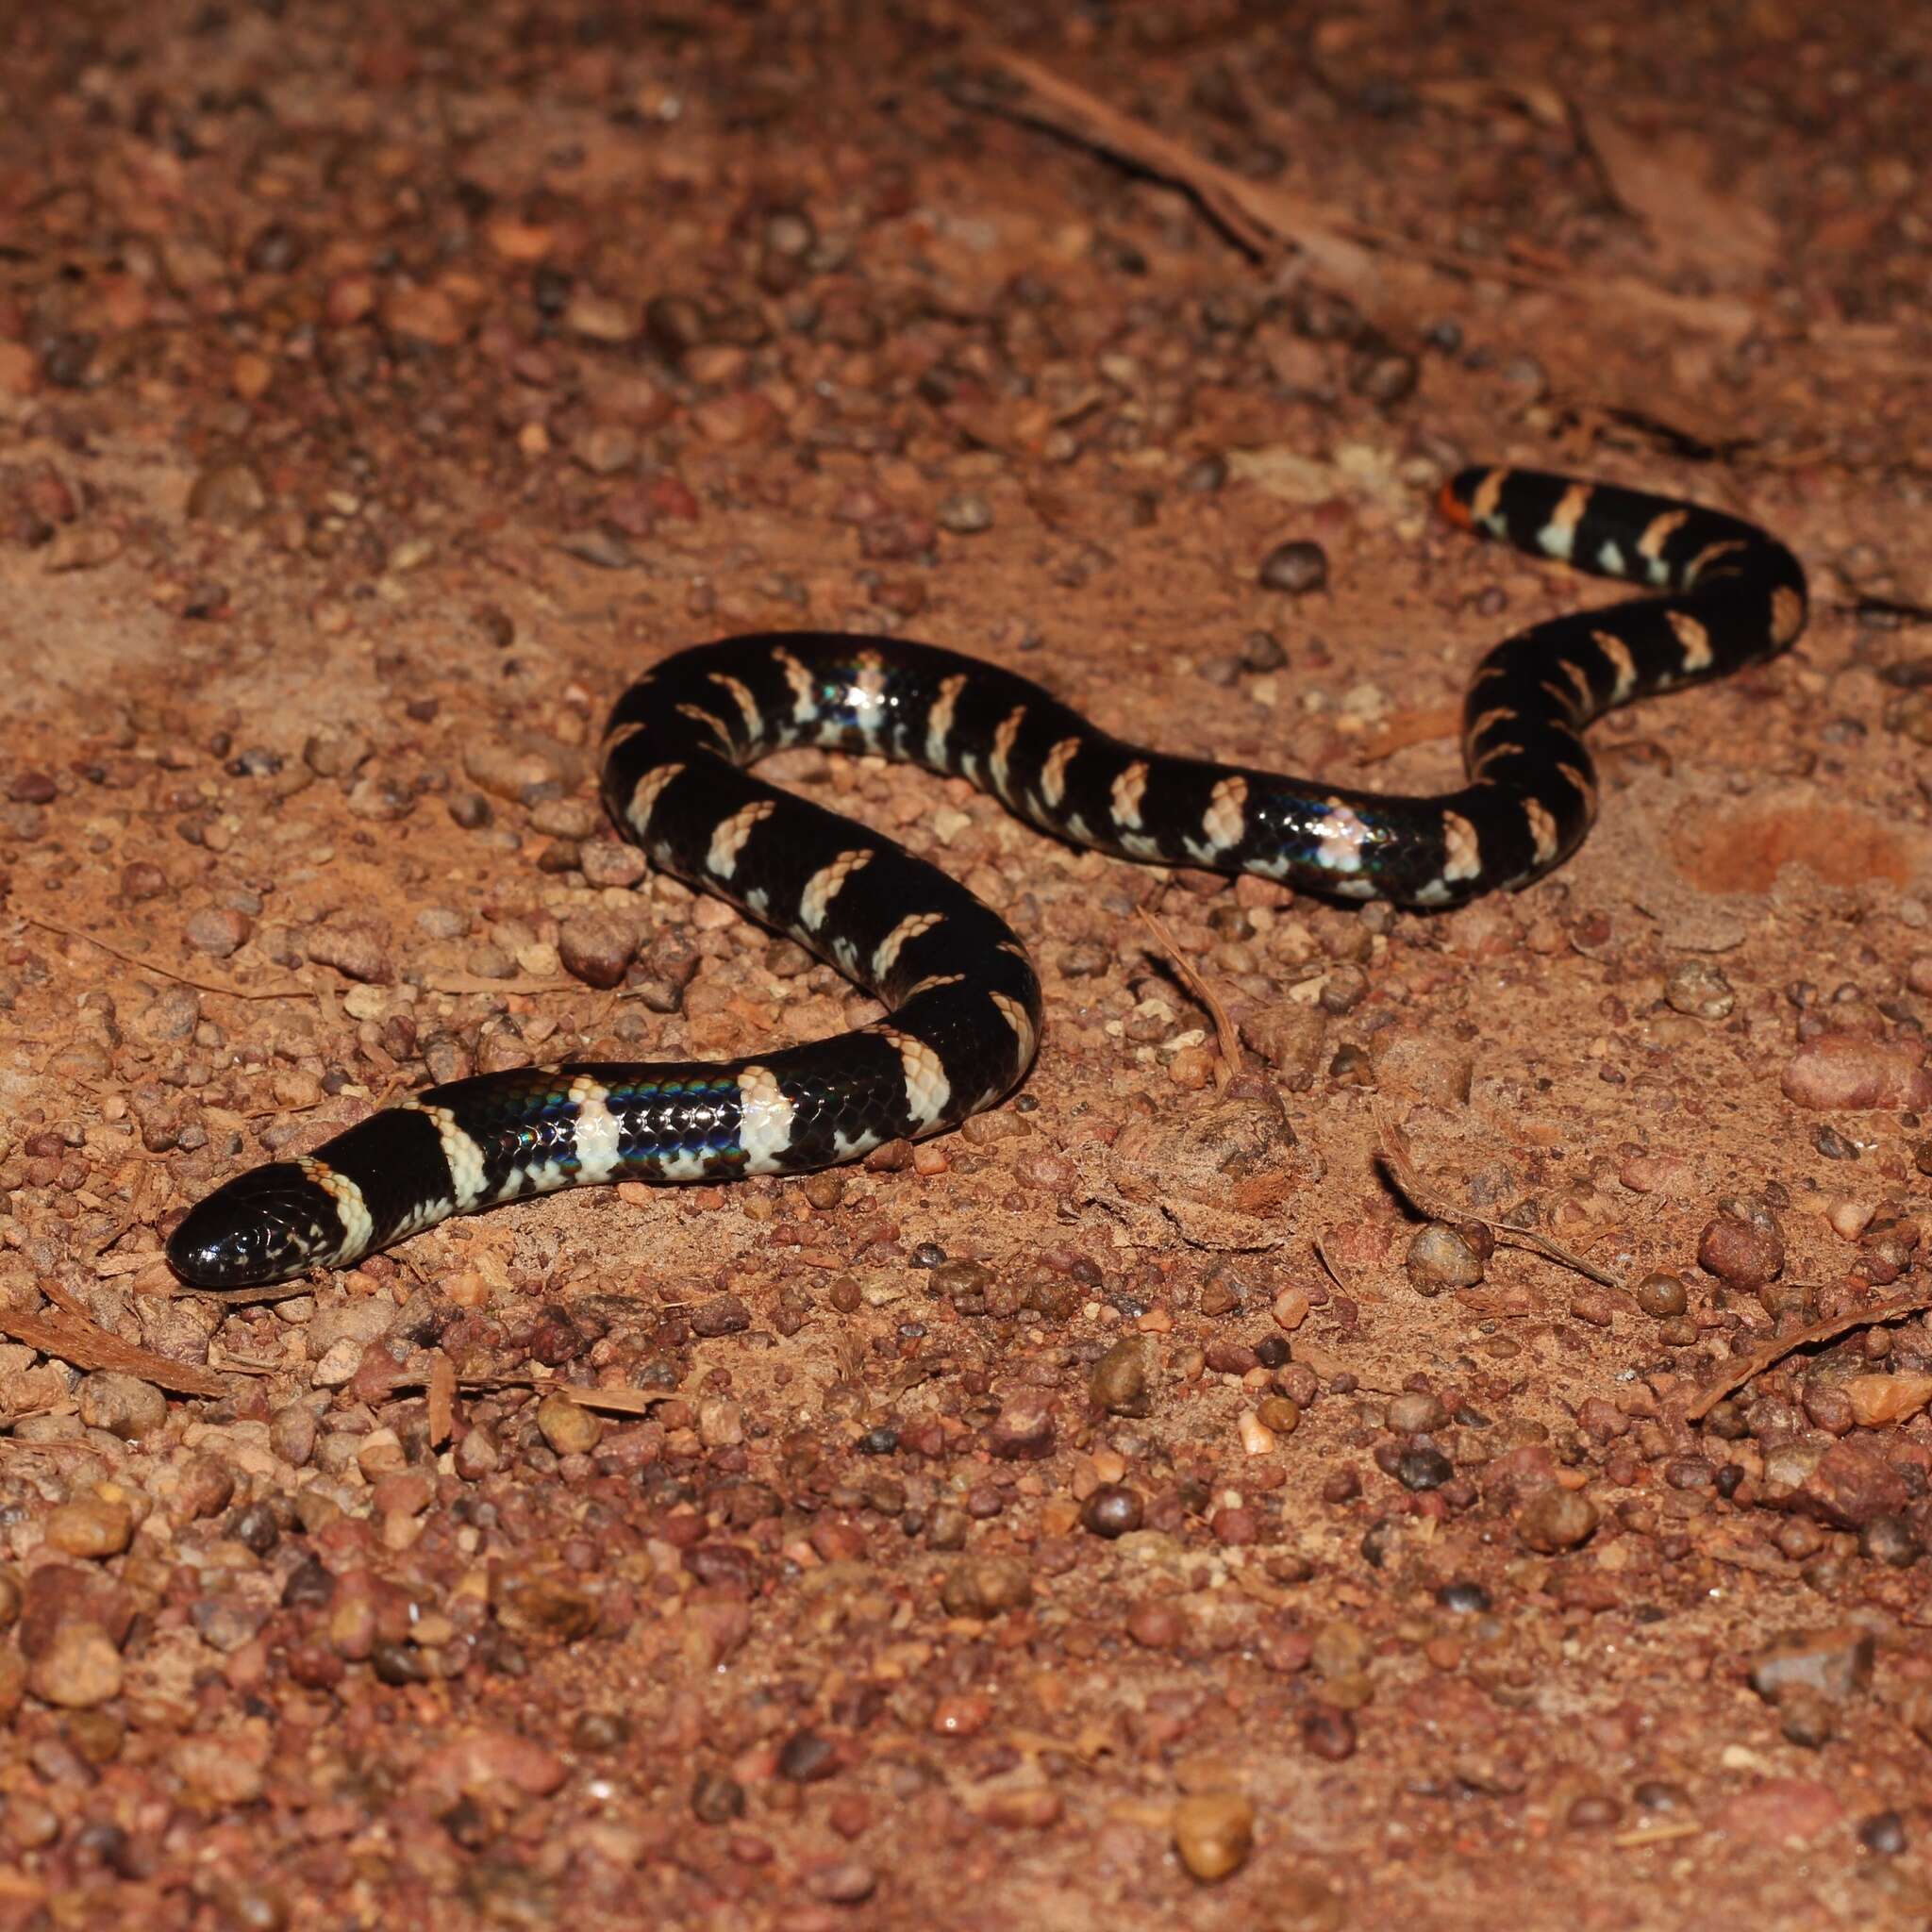 Plancia ëd Cylindrophis jodiae Amarasinghe, Ineich, Campbell & Hallermann 2015